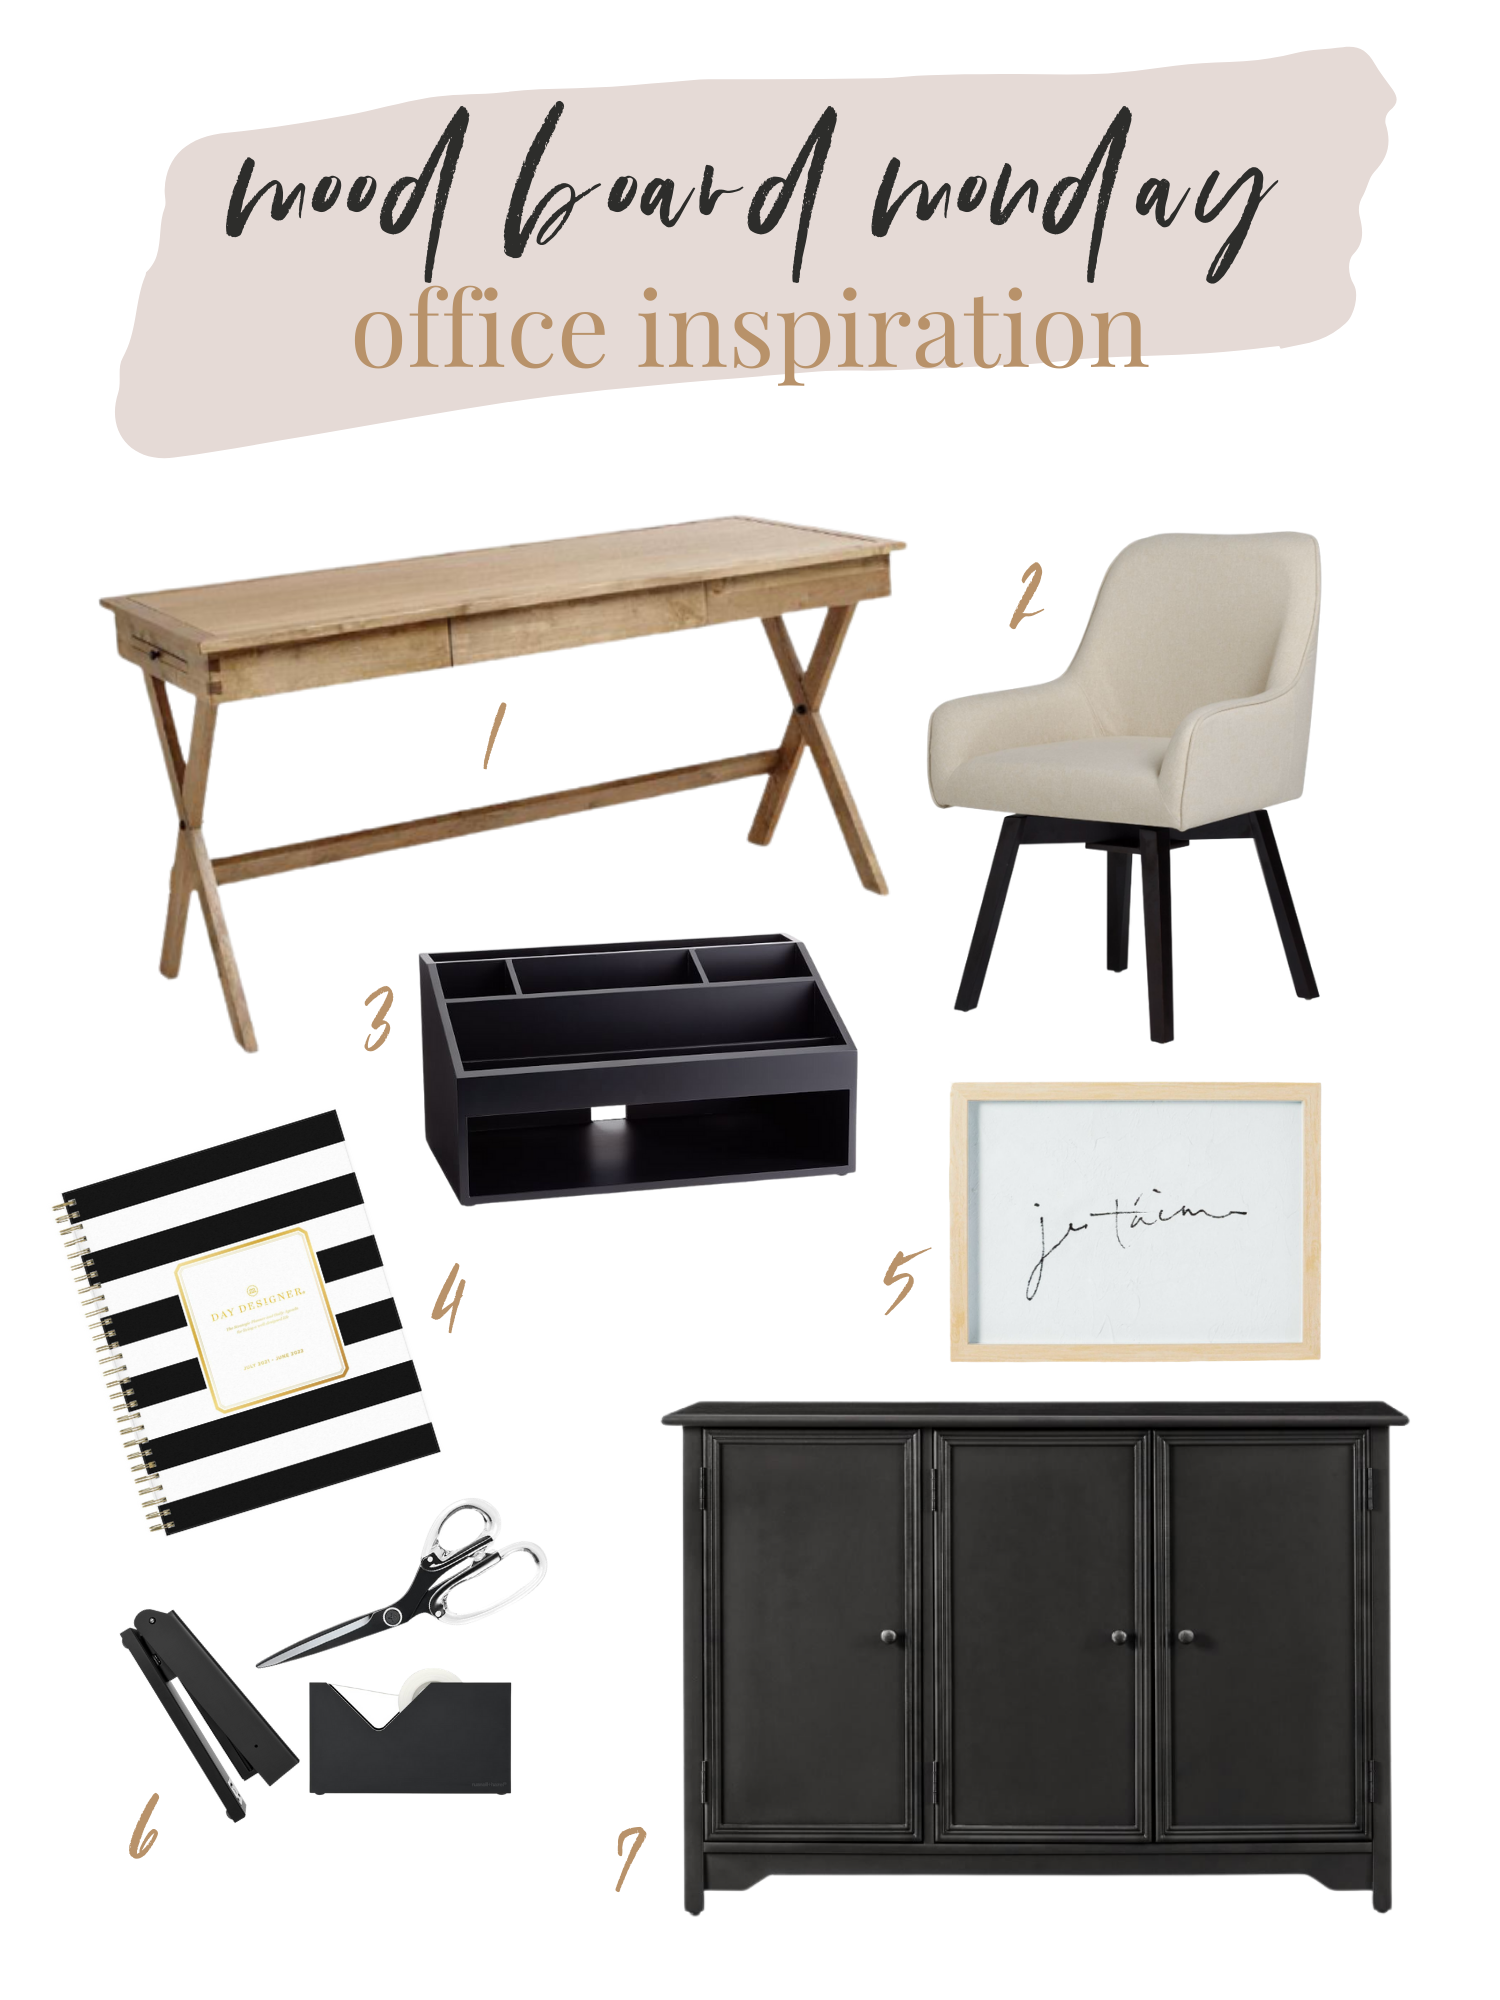 Growing Haines | Mood Board Monday - Office Inspiration